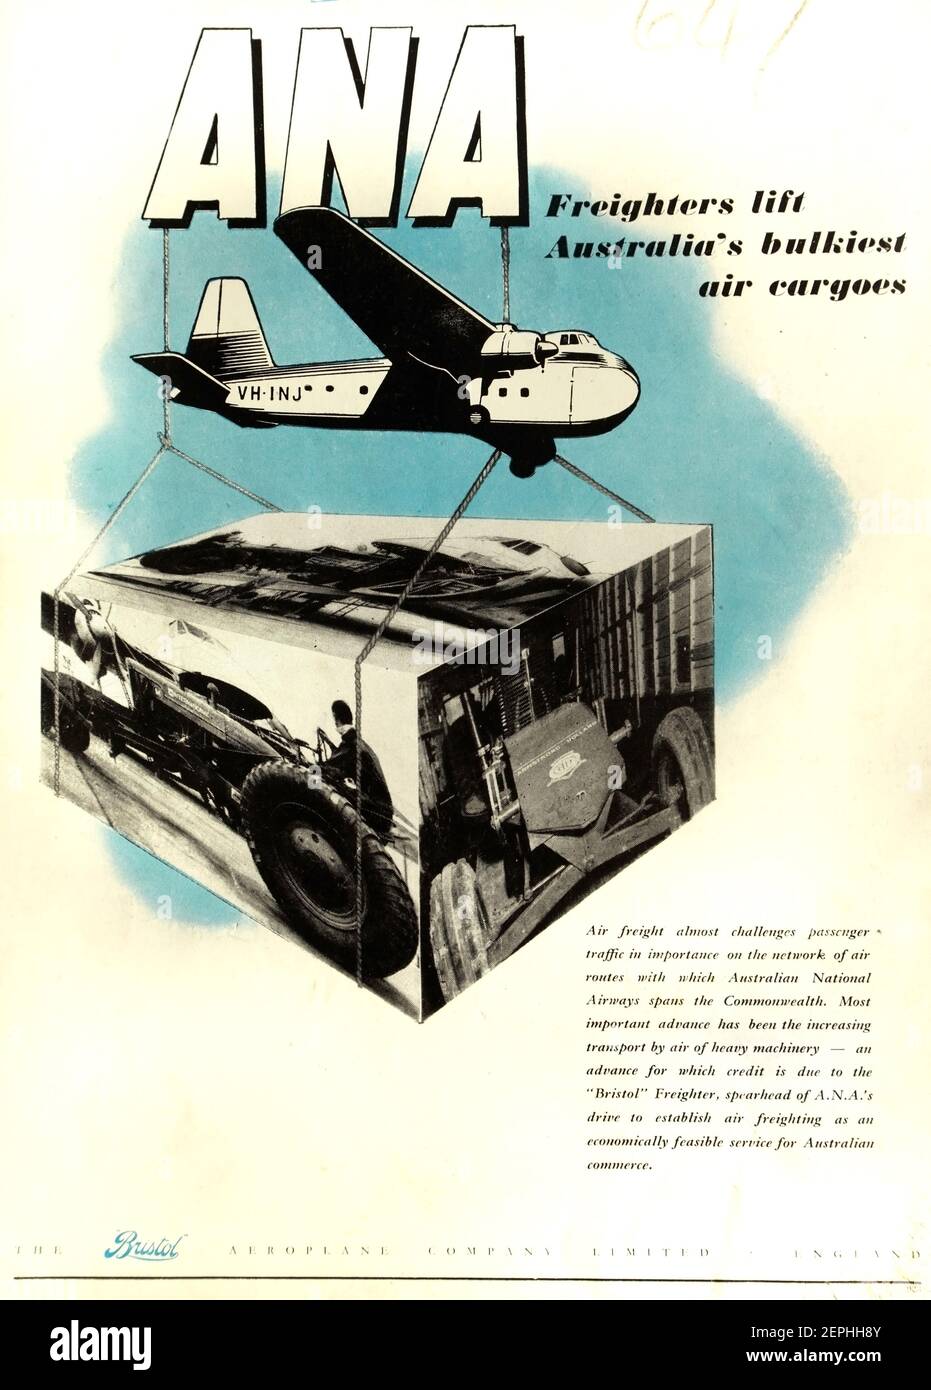 Vintage 1950 advertisement for ANA (Australian National Airways) air freight featuring the Bristol Freighter aircraft. Stock Photo